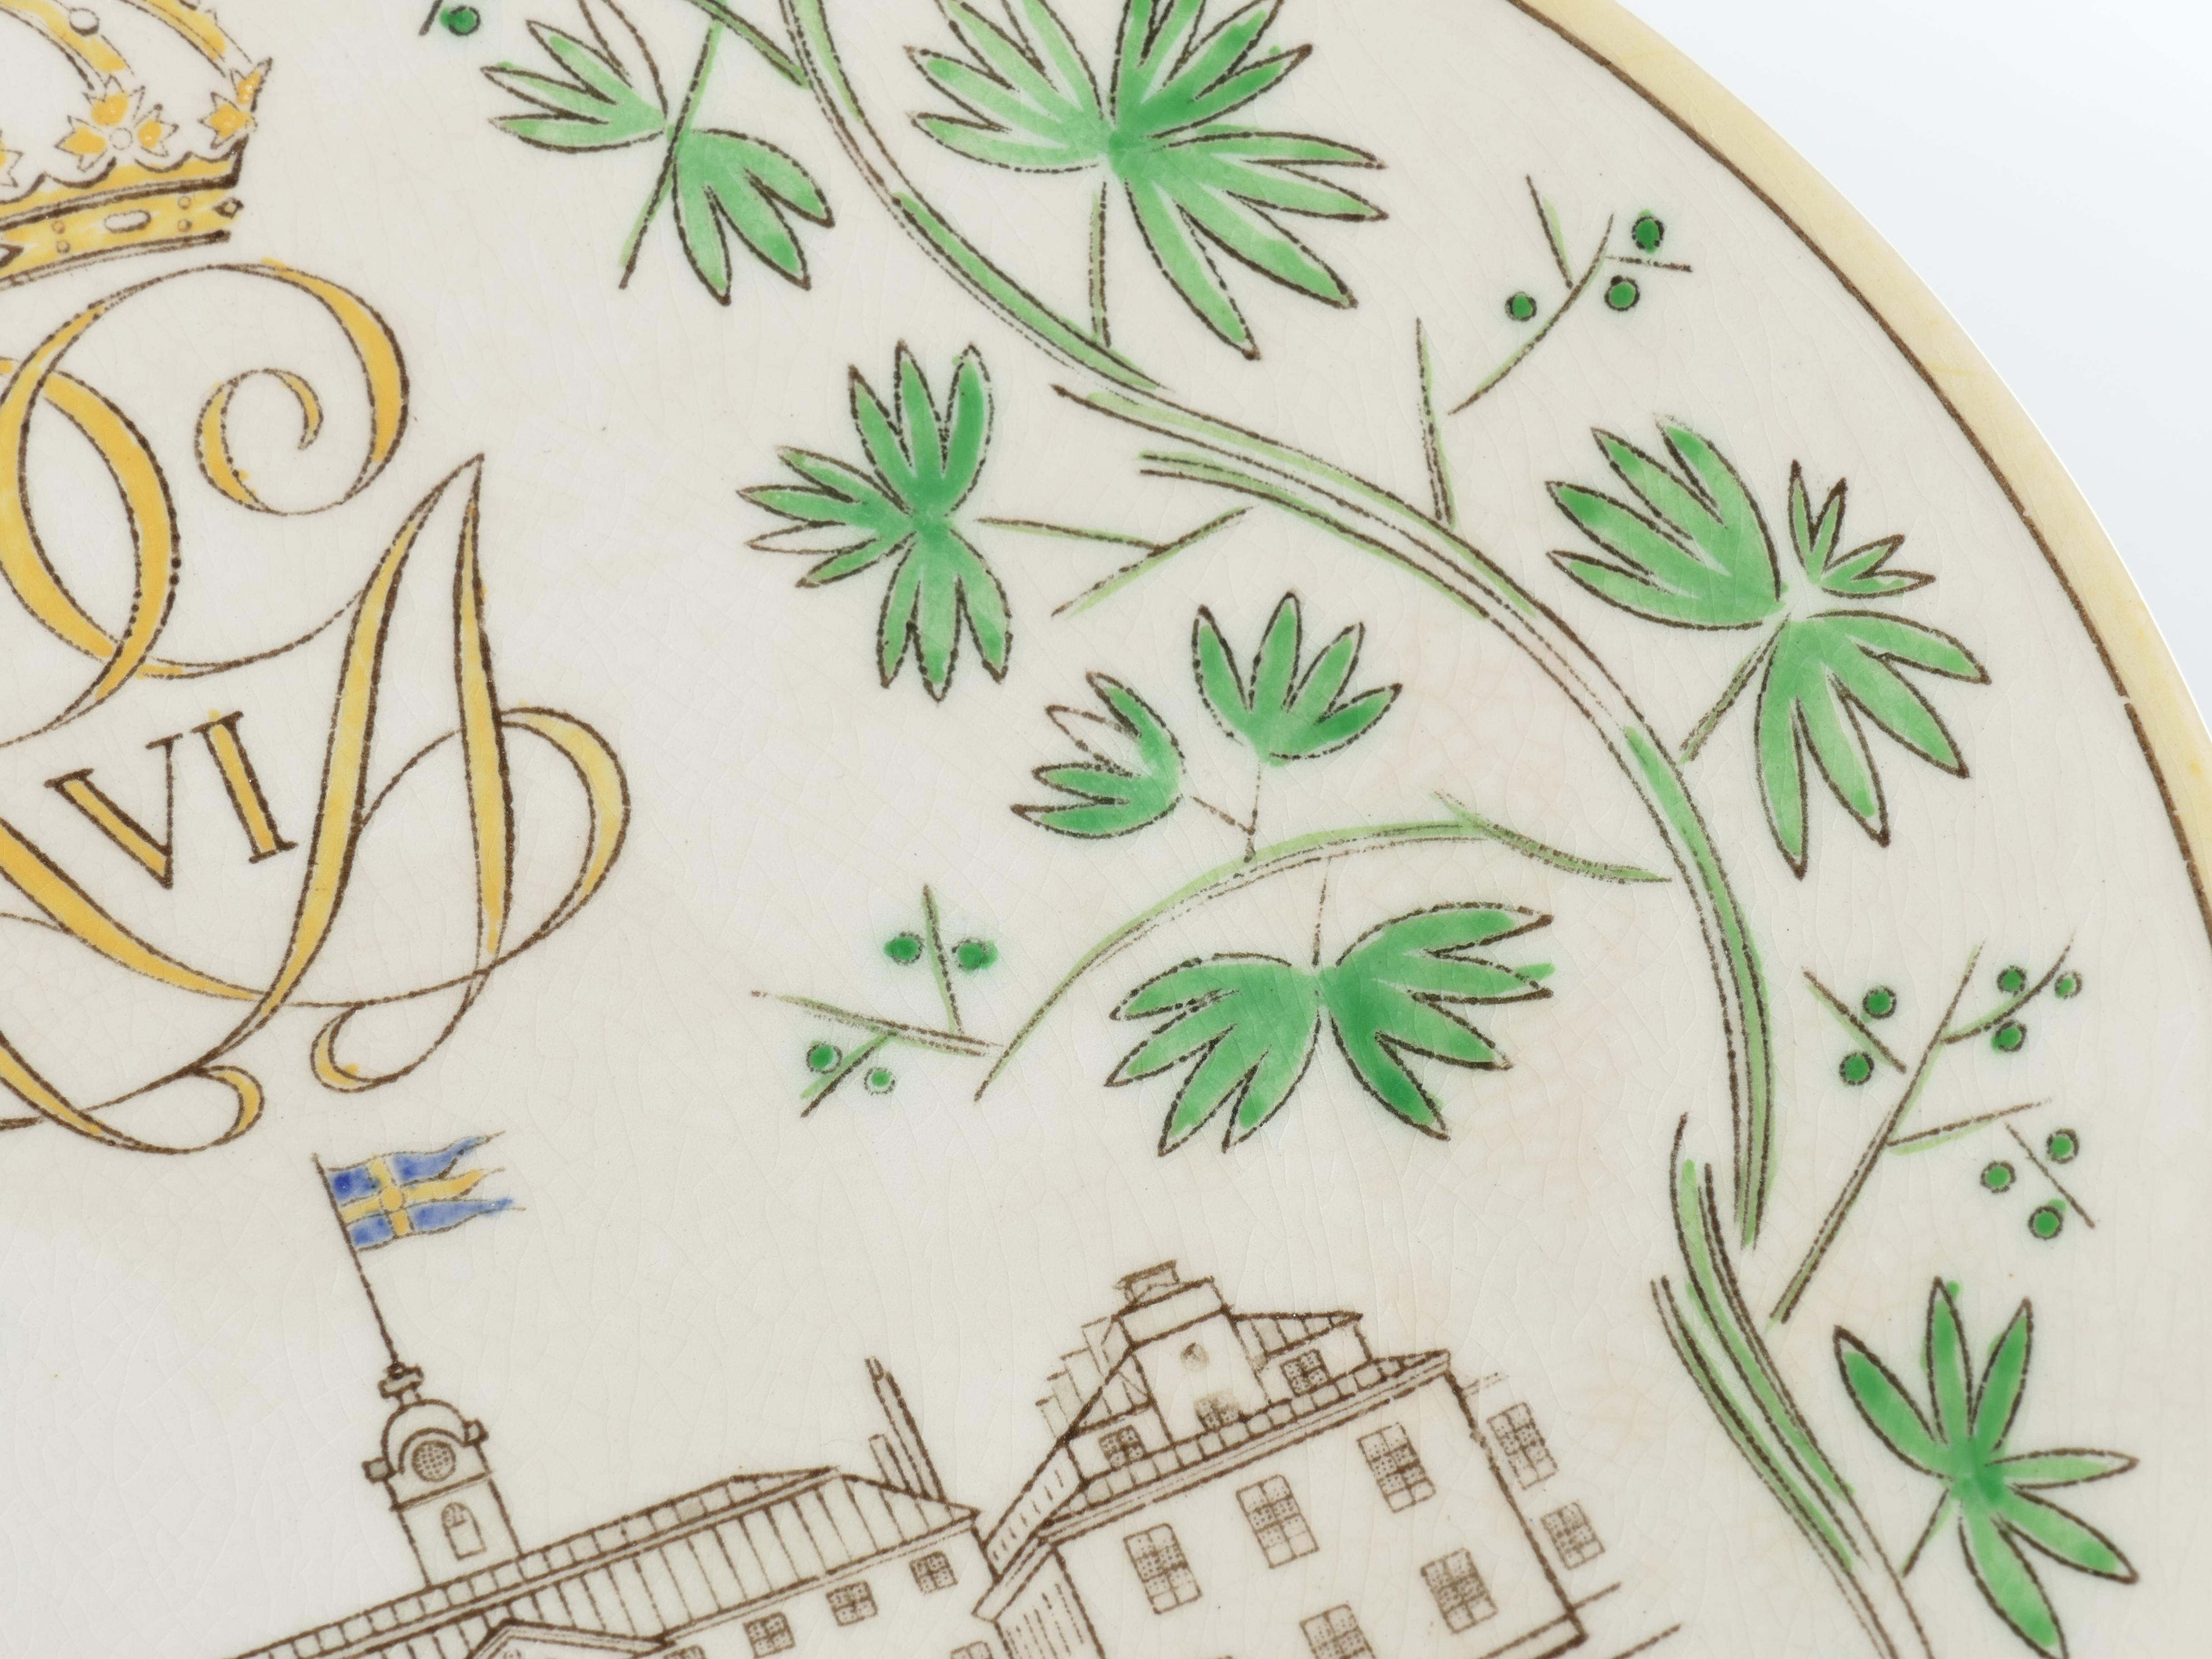 Swedish Grace Plates with Ulriksdal Palace in Yellow and Green by Gefle 1951 For Sale 3